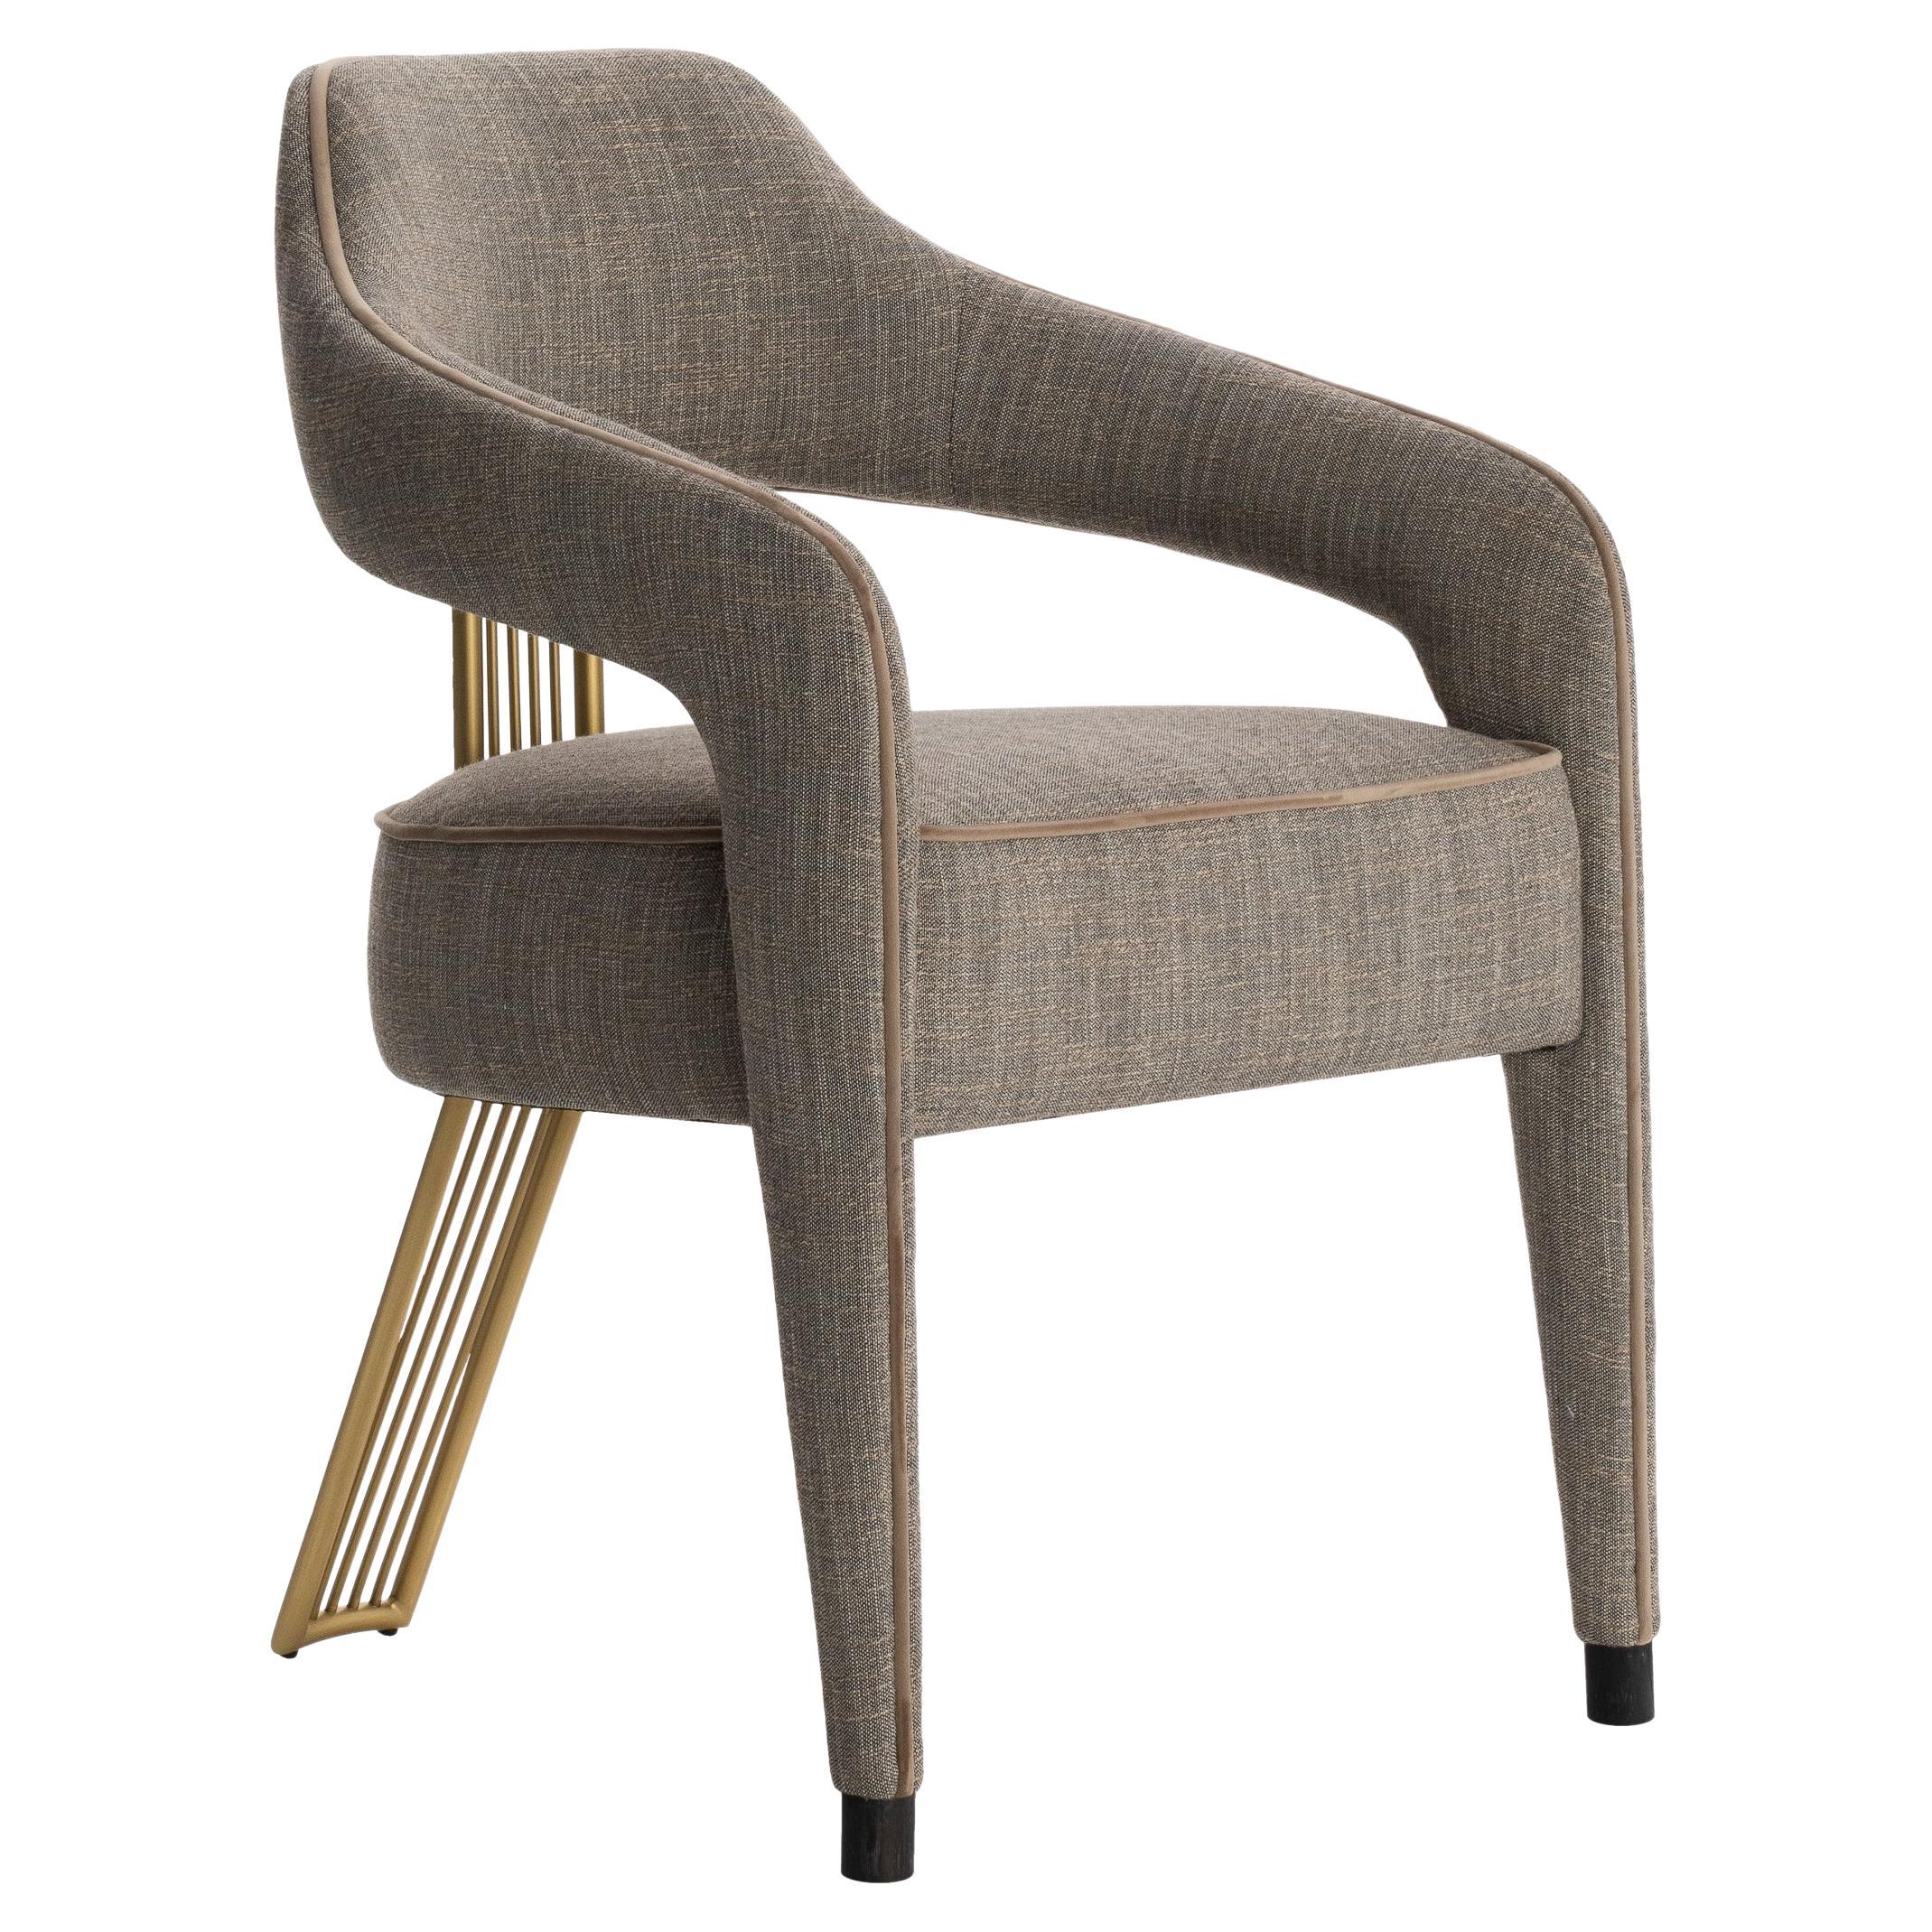 INVICTA II dining chair with brass rear leg